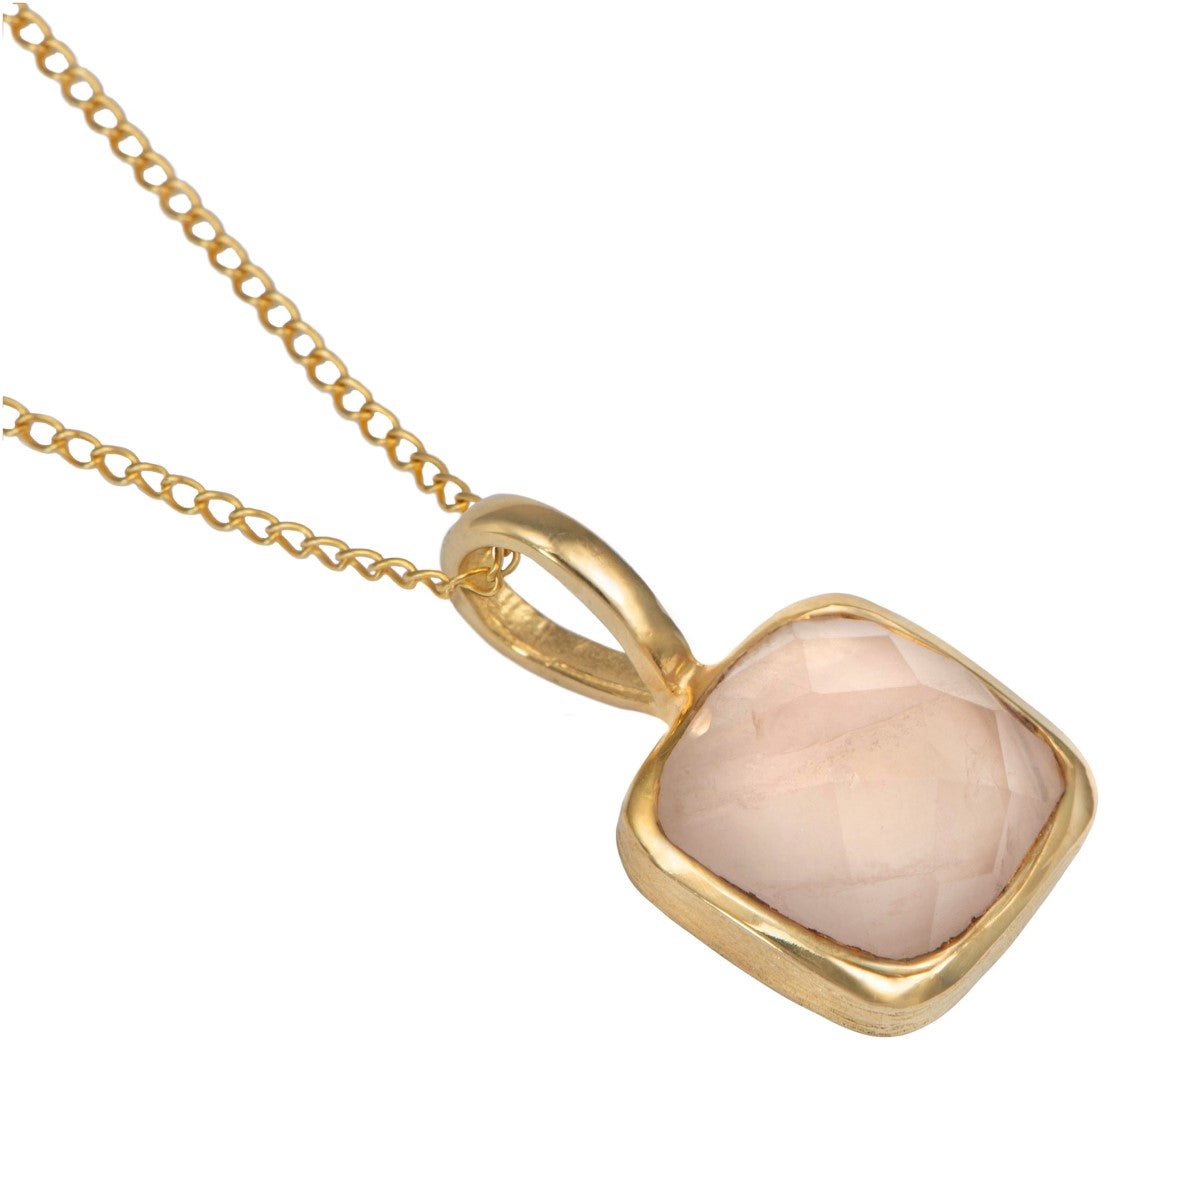 Gold Plated Sterling Silver Pendant Necklace with a Faceted Square Gemstone - Rose Quartz